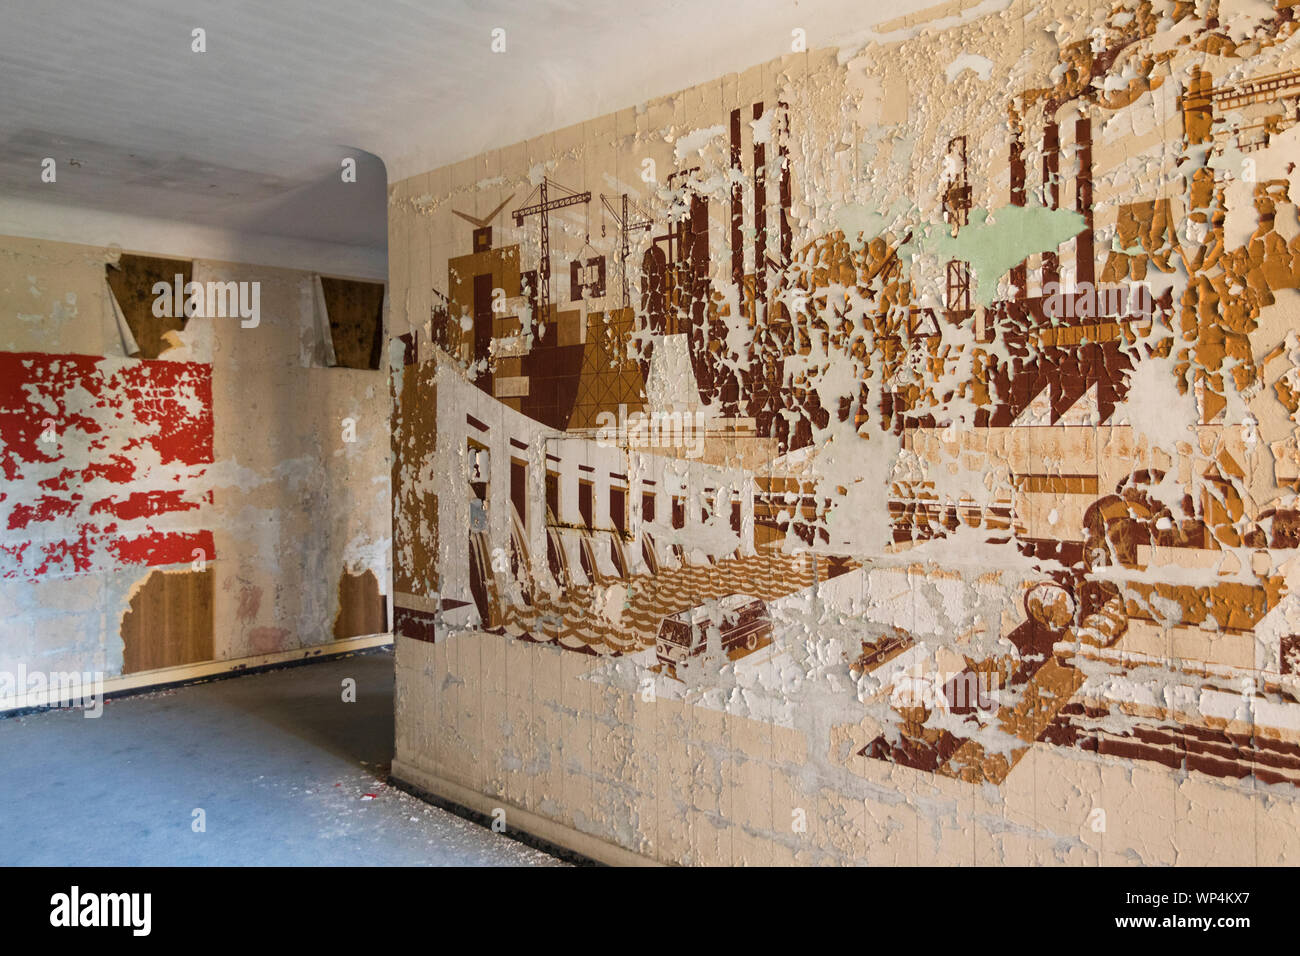 Communist wall art depicting weapon industry at former historical headquarters barracks in, Wünsdorf, Germany, abandoned by the Russian army in 1994 Stock Photo